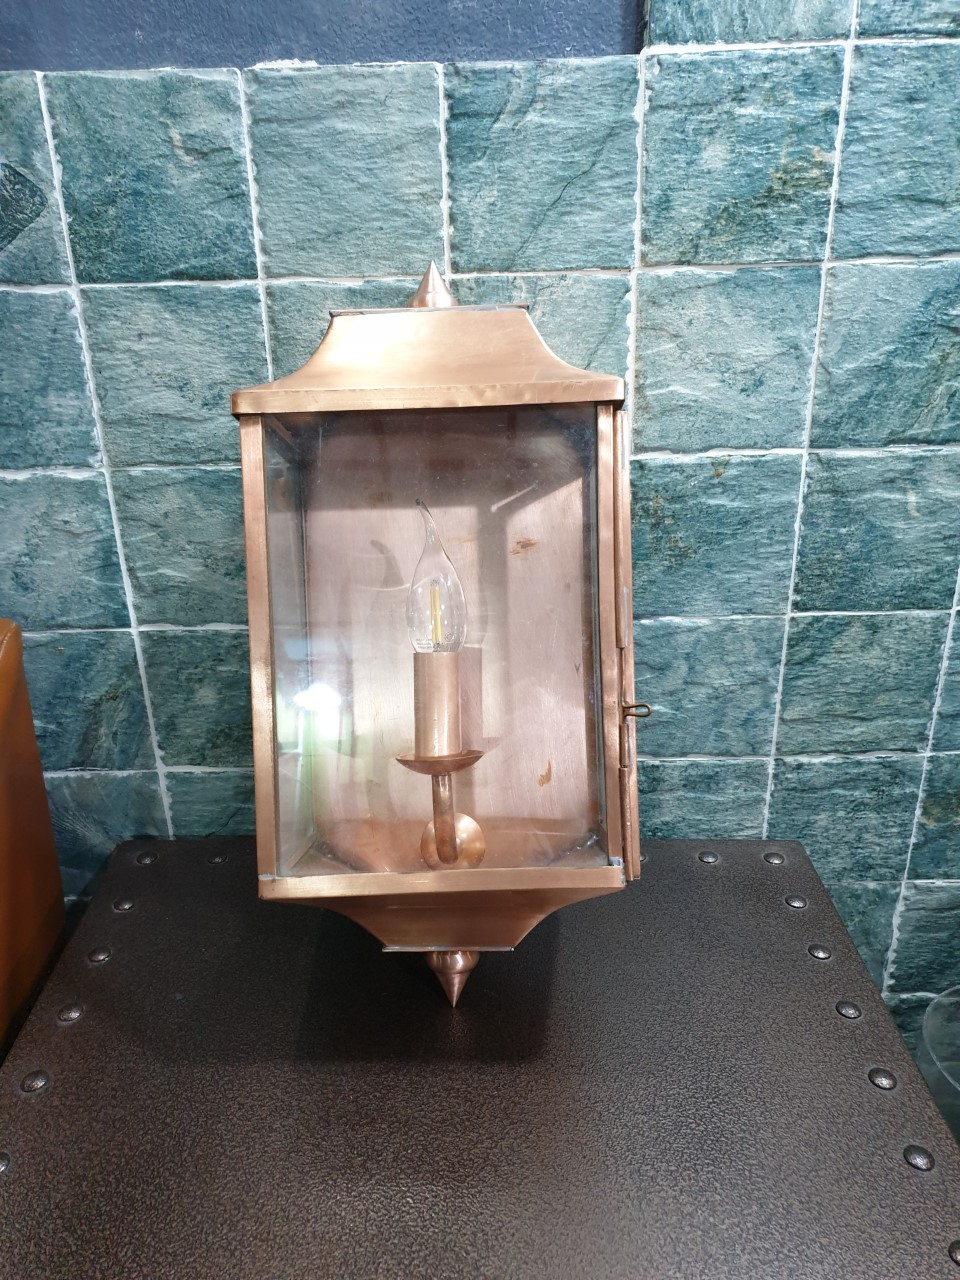 Copper wall lamp out door and in door Item Code CPW43 size long430 mm total wide 190 mm.deep 130 mm.